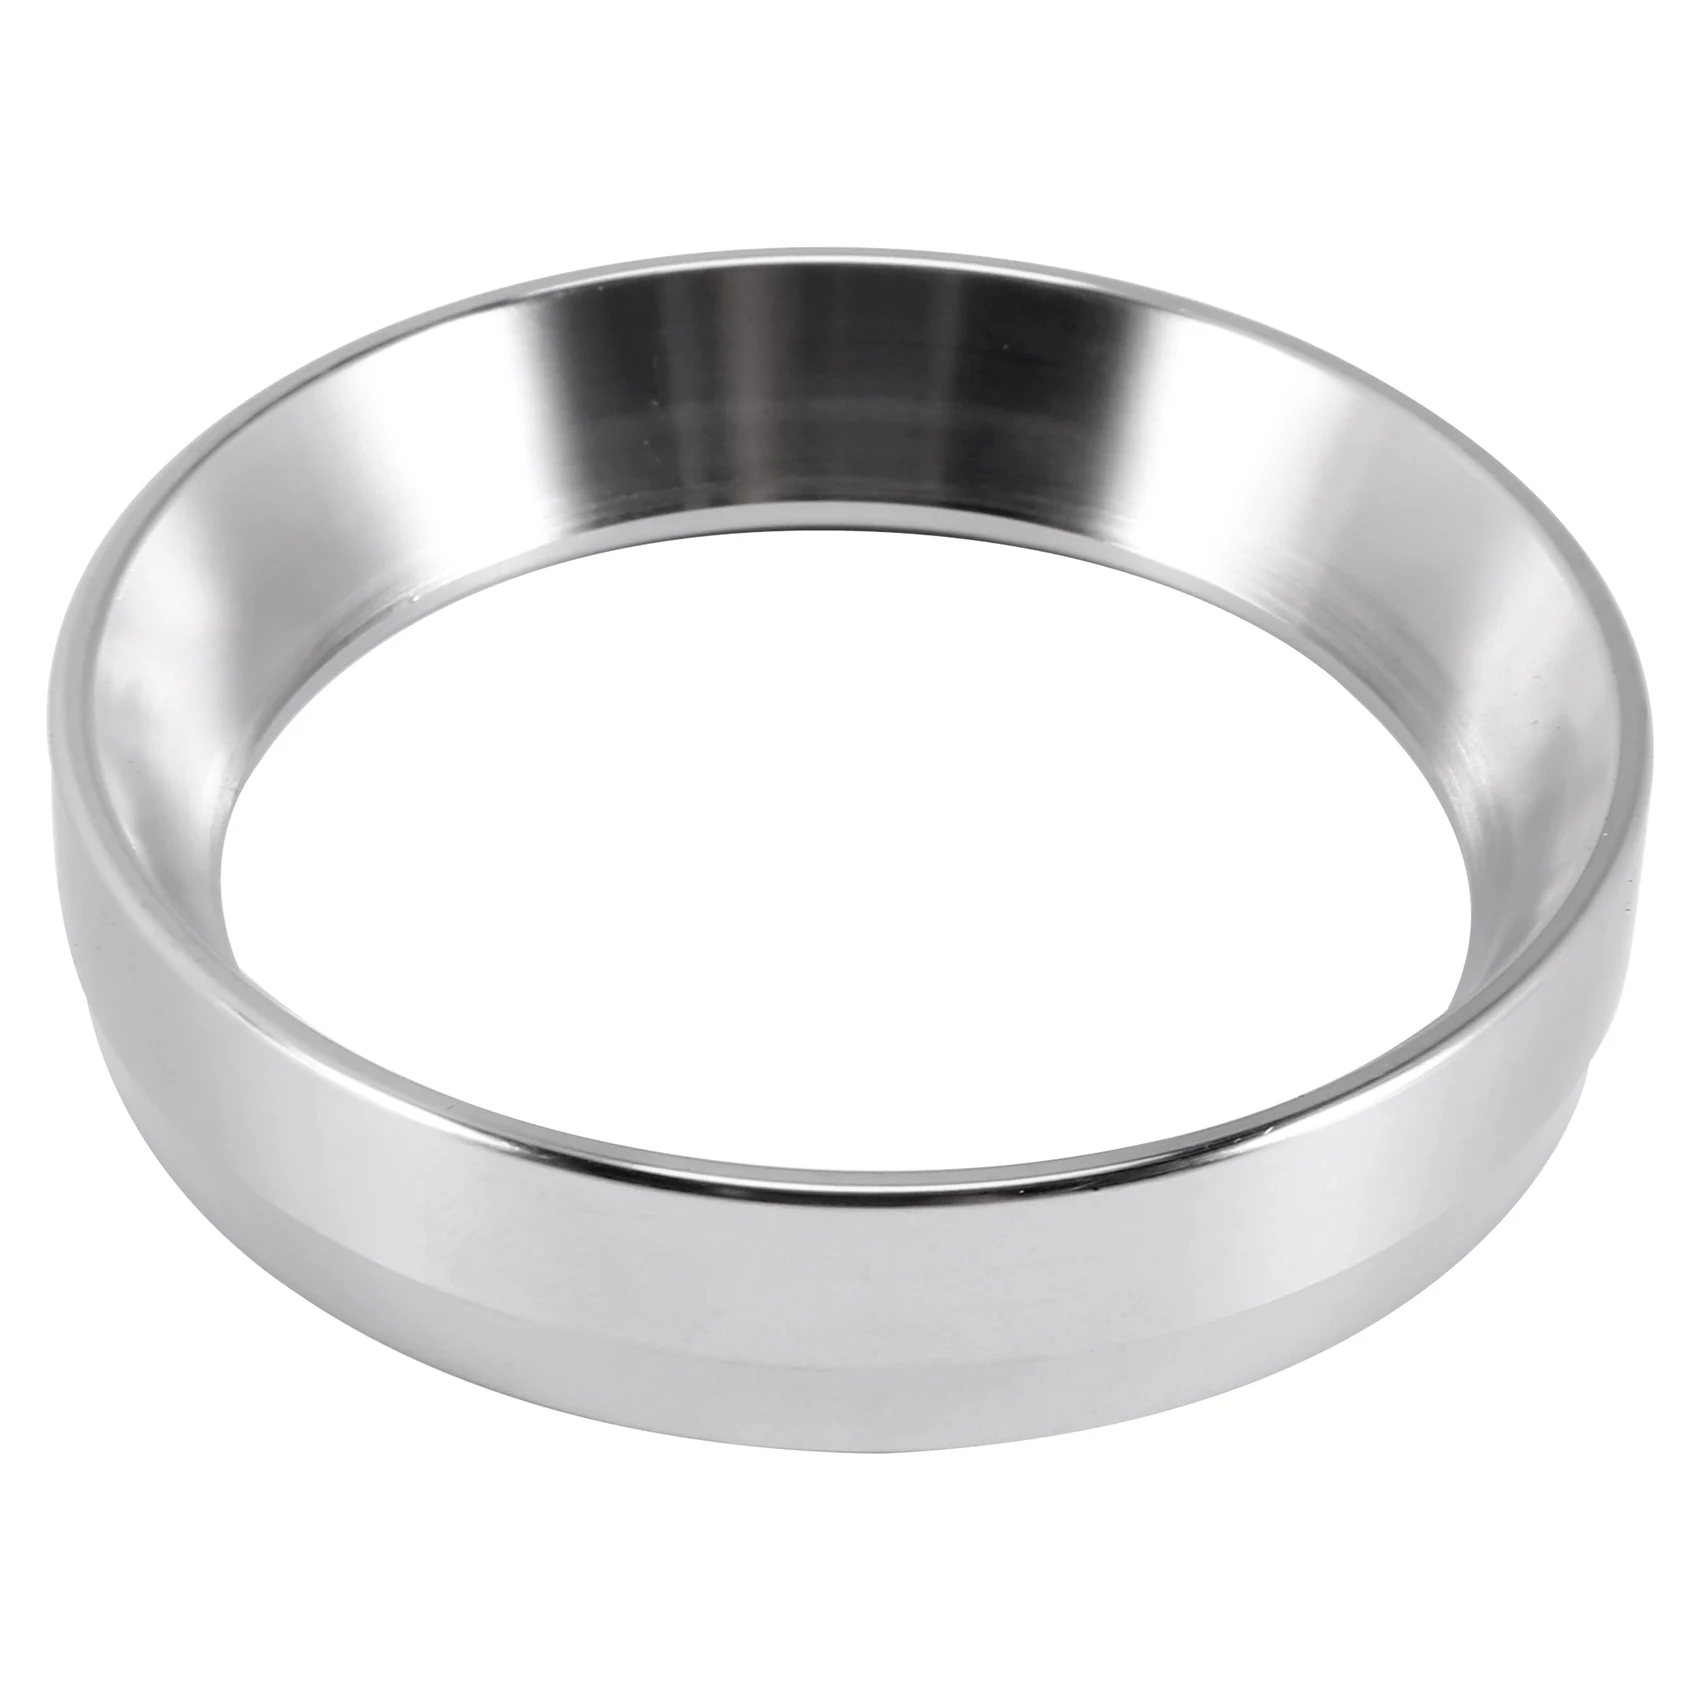 

54mm Dosing Ring Stainless Steel Coffee Dosing Ring Espresso Dosing Funnel Coffee Protafilter Ring for 54mm Portafilter